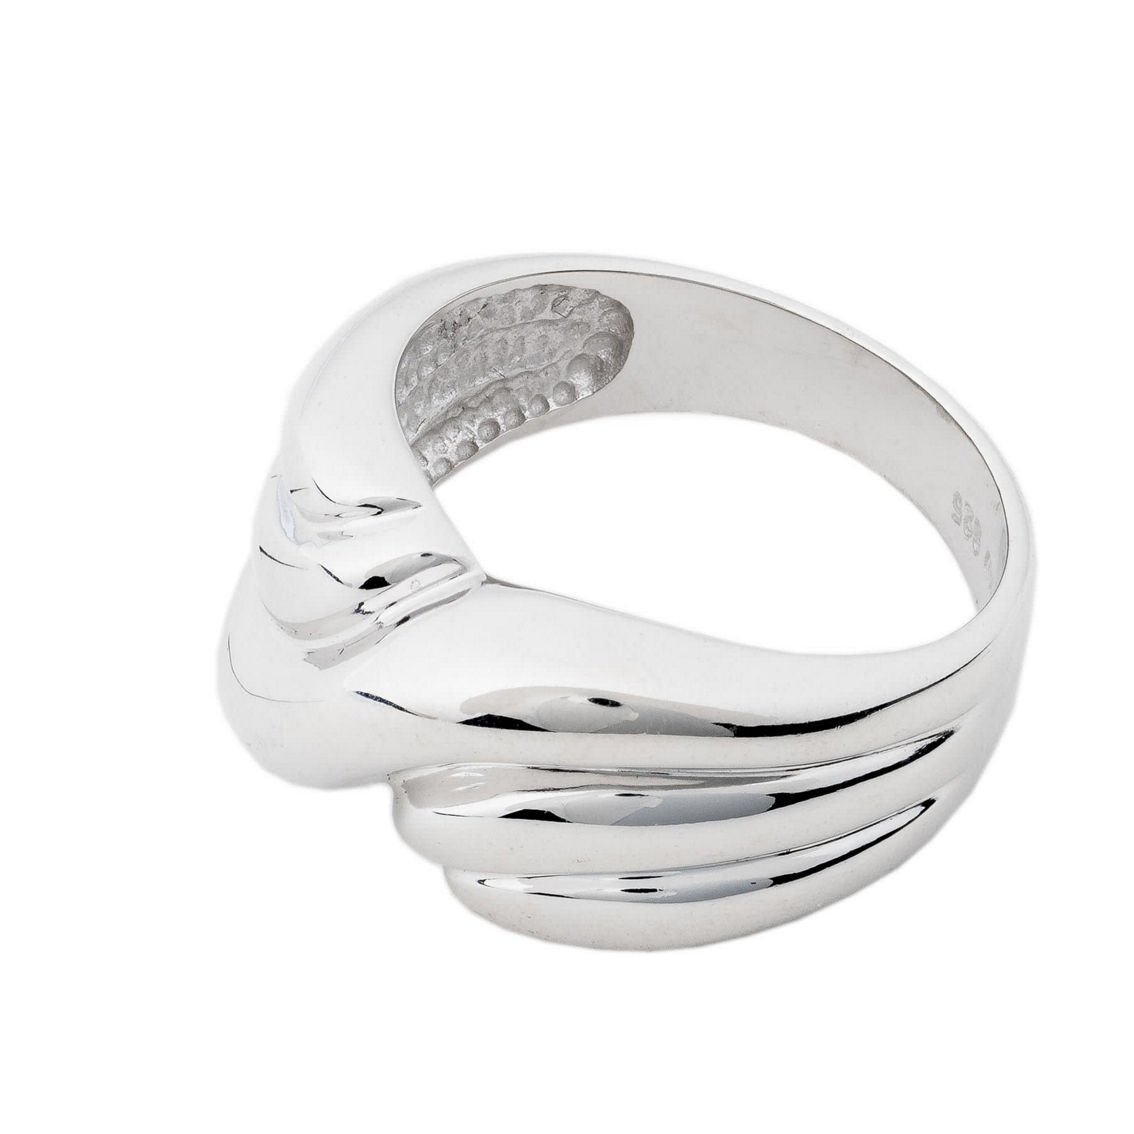 Traditions Jewelry Company Sterling Silver Wavy Dome Ring - Image 2 of 2